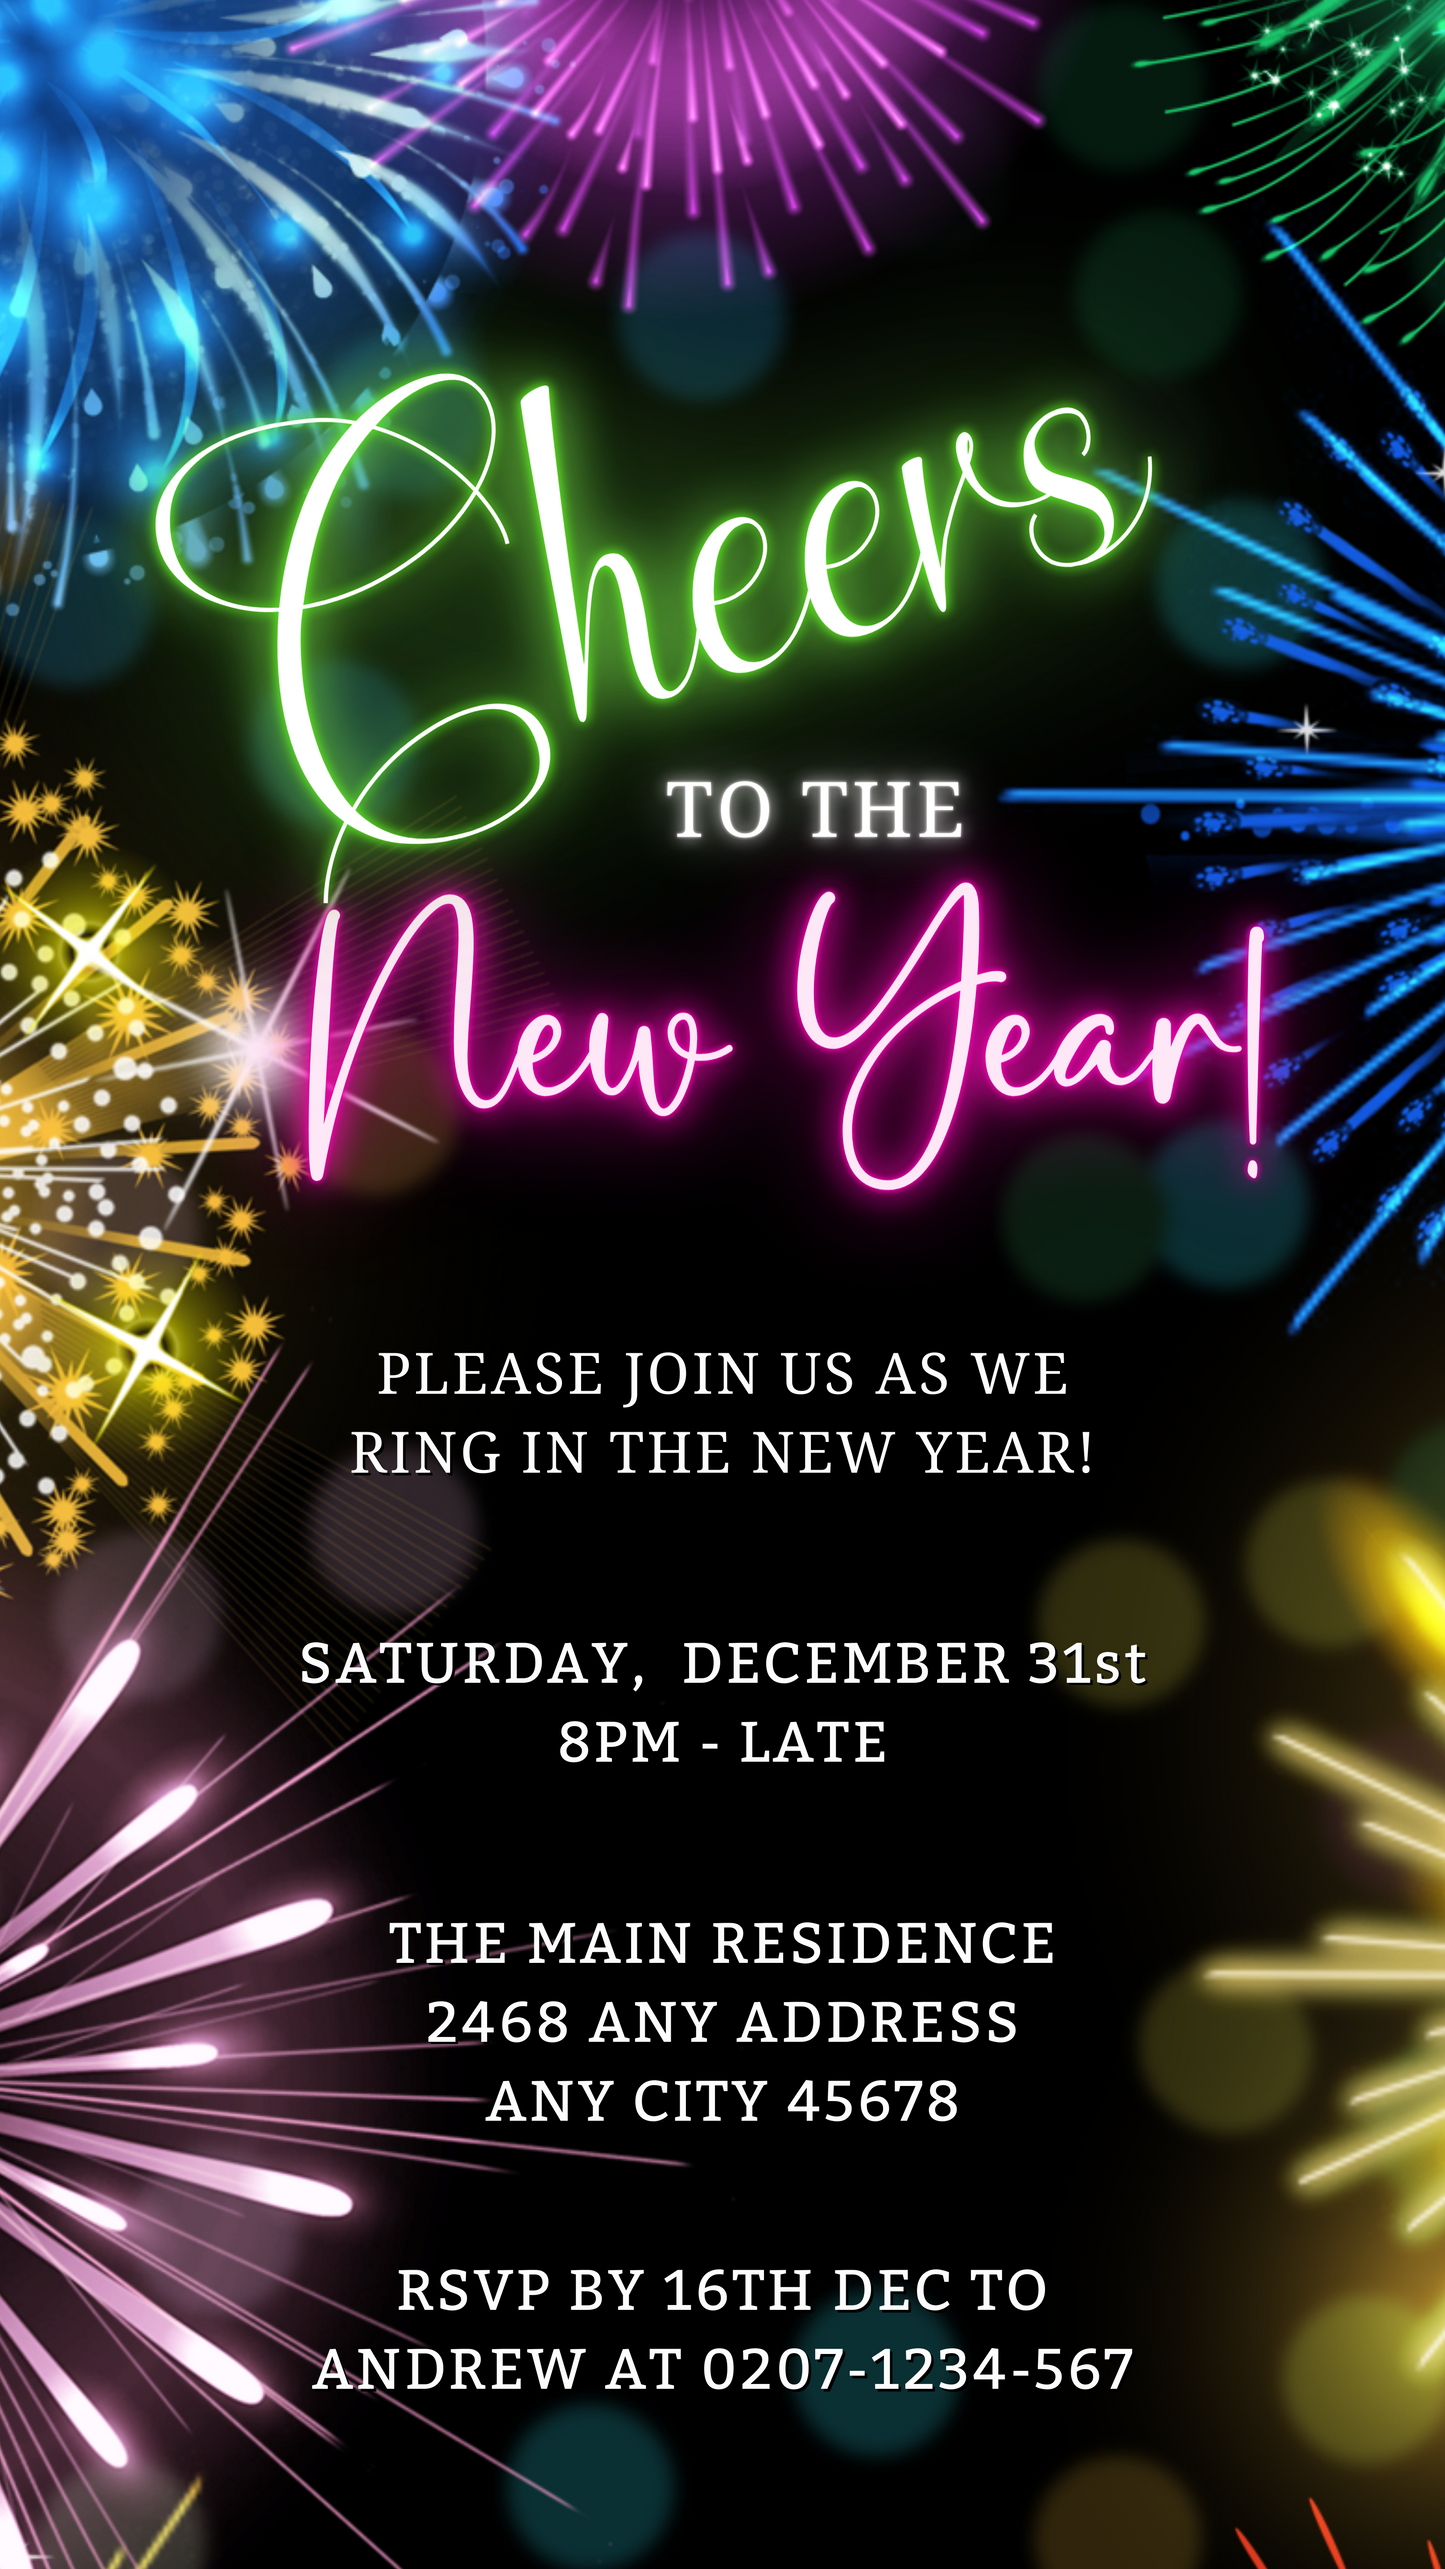 Neon Pink Green Fireworks digital invitation template for New Year's Eve party, customizable via Canva, ideal for smartphone sharing.